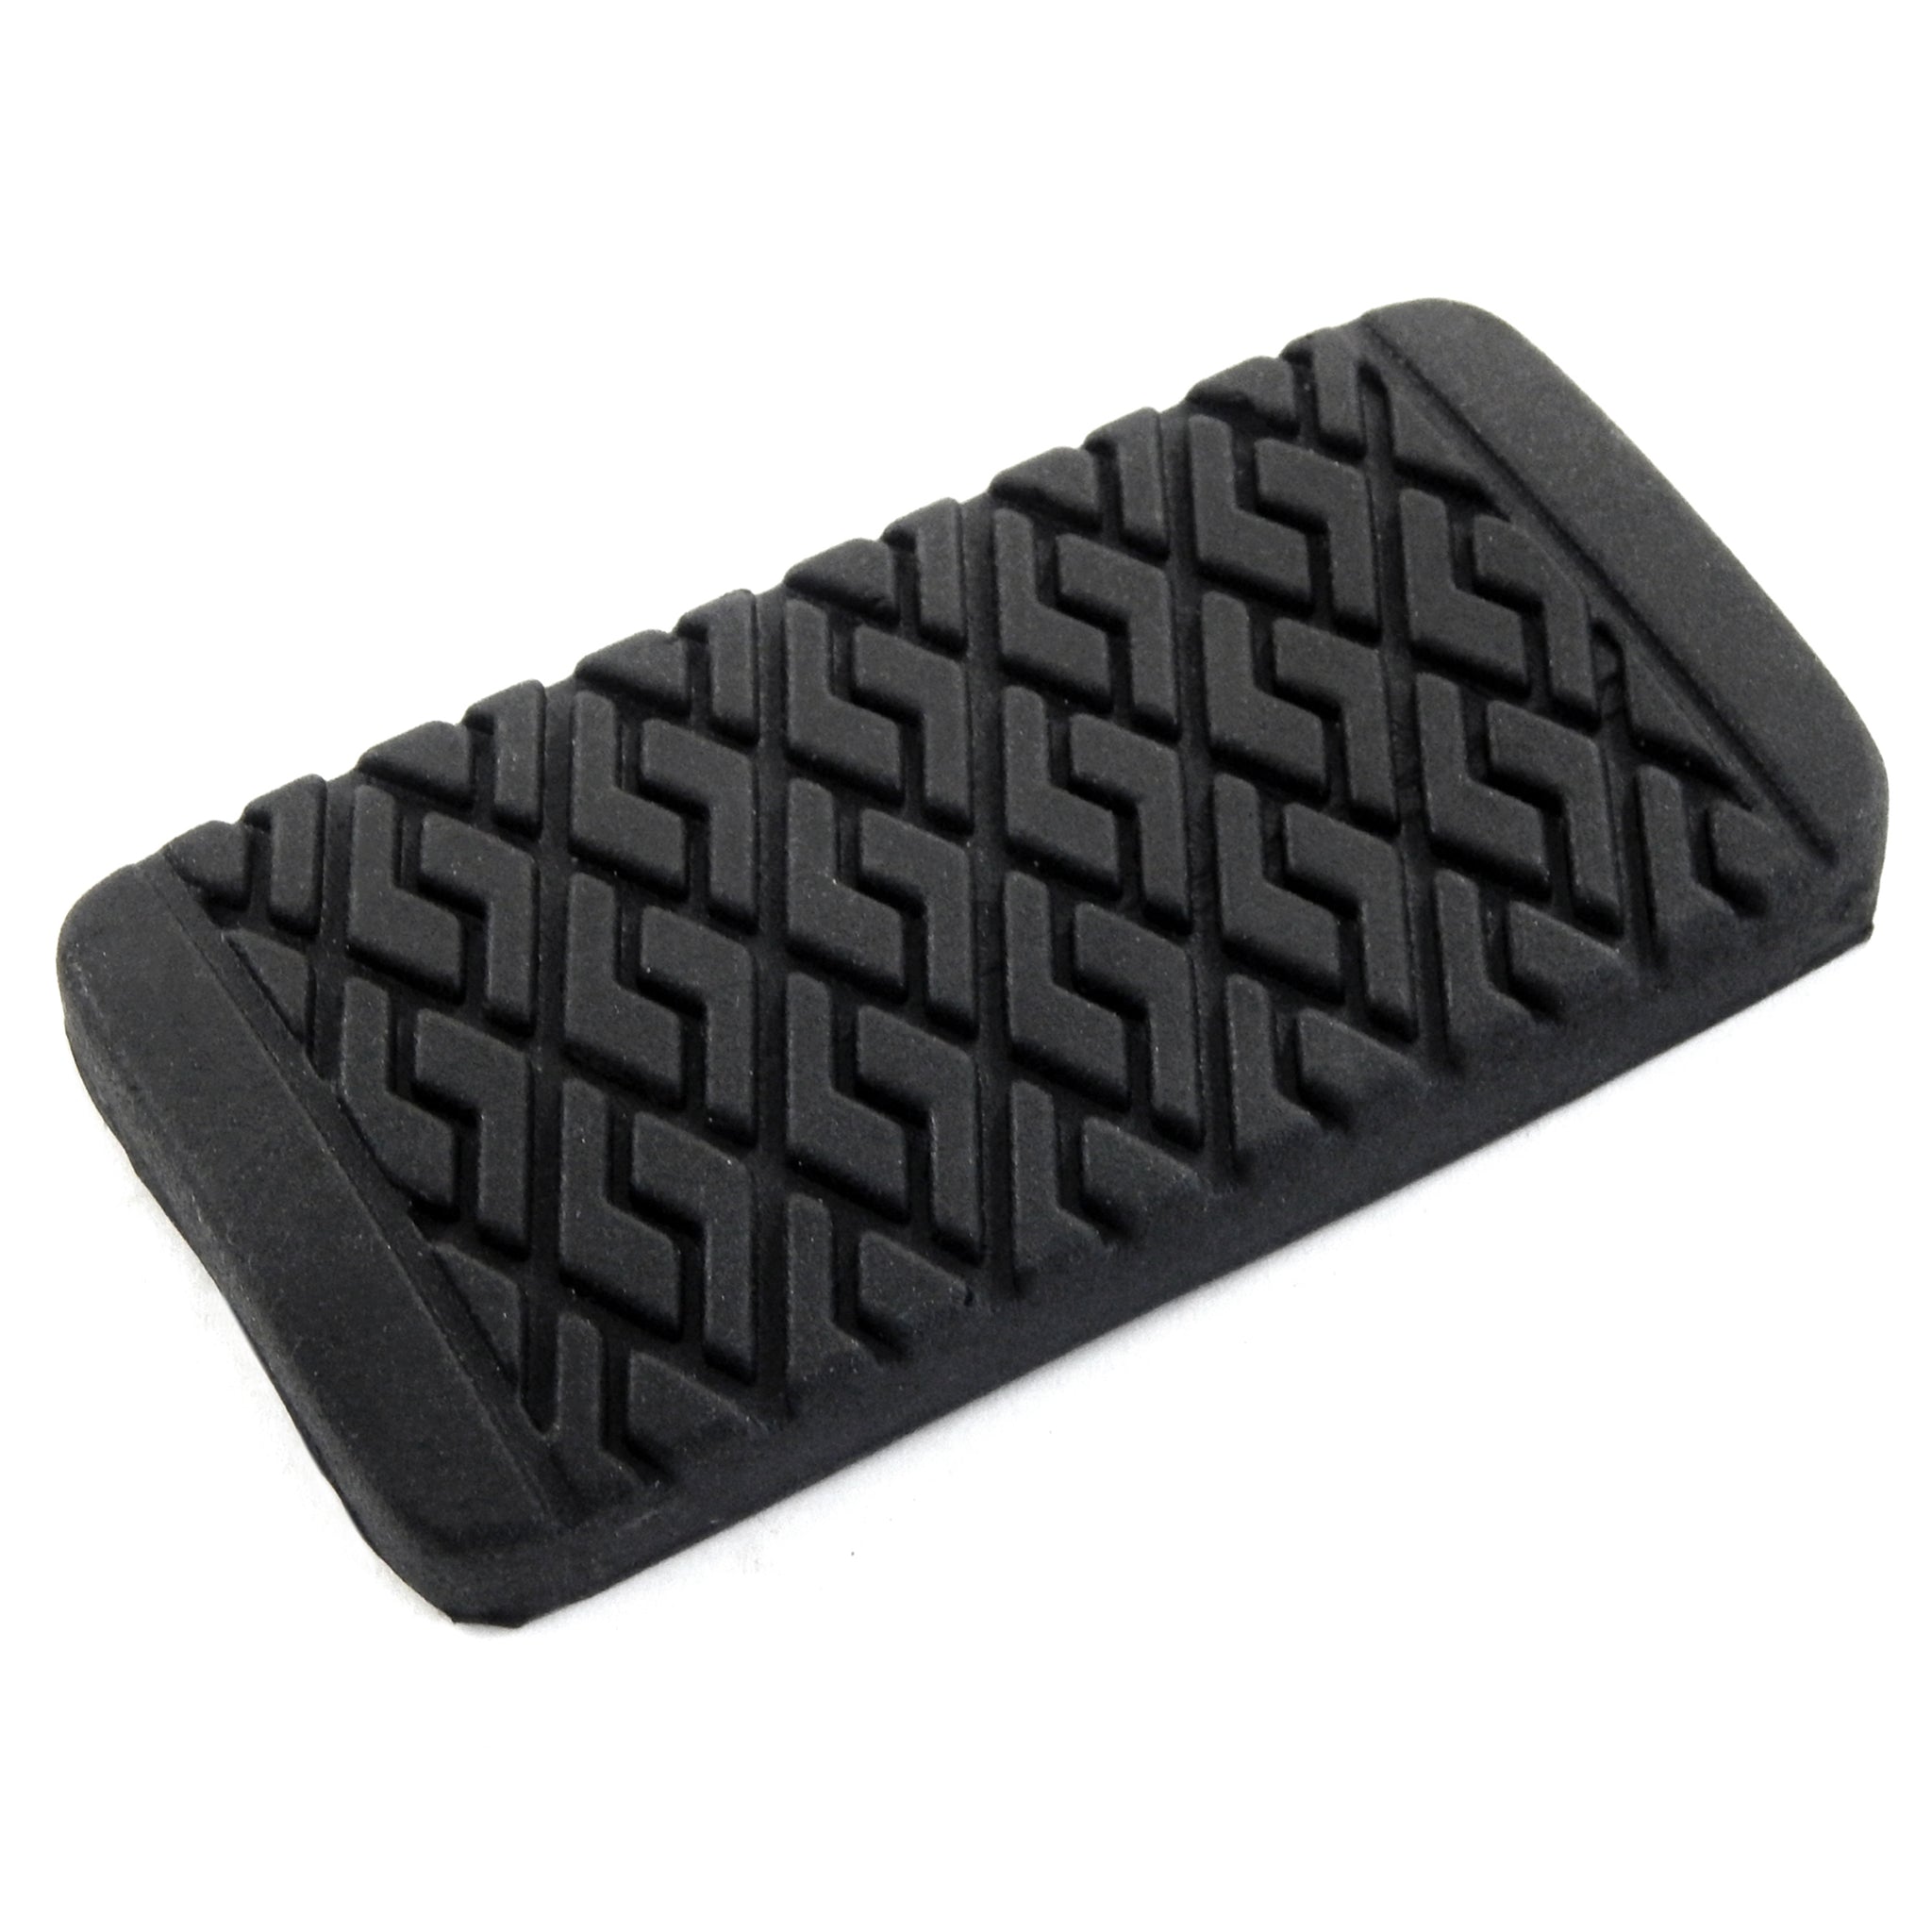 Red Hound Auto Brake Pedal Pad for Automatic Transmission on Compatible with Toyota Tercel Corolla MR2 Paseo Matrix New